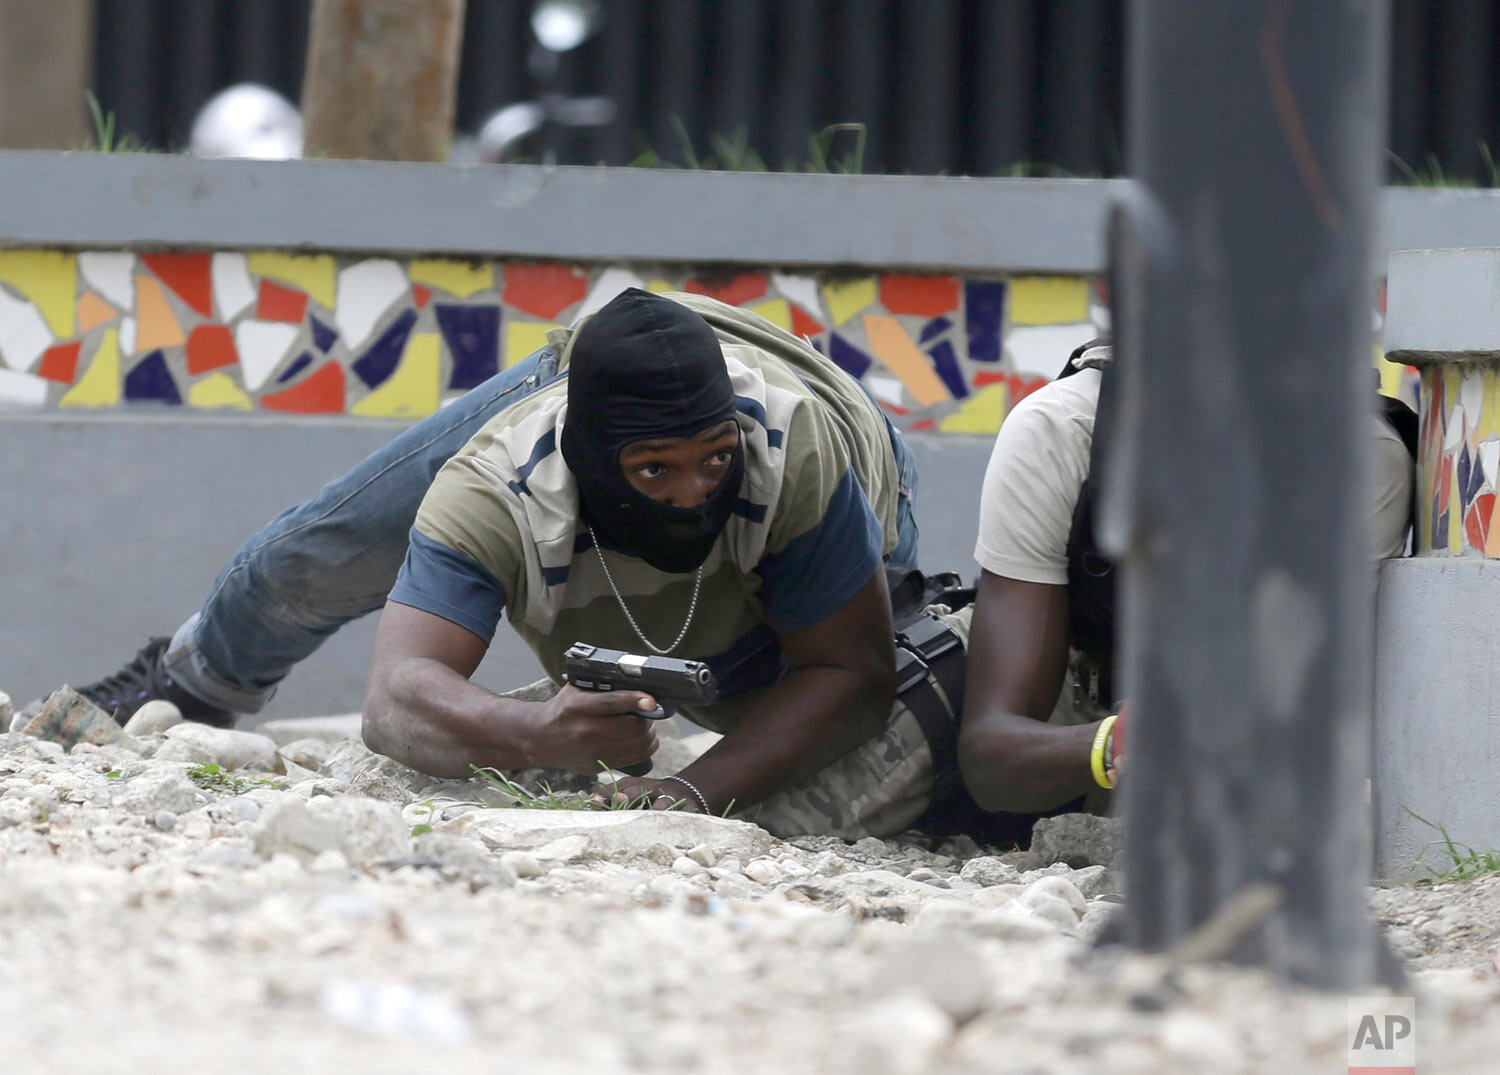  Armed off-duty police officers take cover during and exchange of gunfire with army soldiers, as they protest over police pay and working conditions, in Port-au-Prince, Haiti, Sunday, Feb. 23, 2020. (AP Photo/Dieu Nalio Chery) 